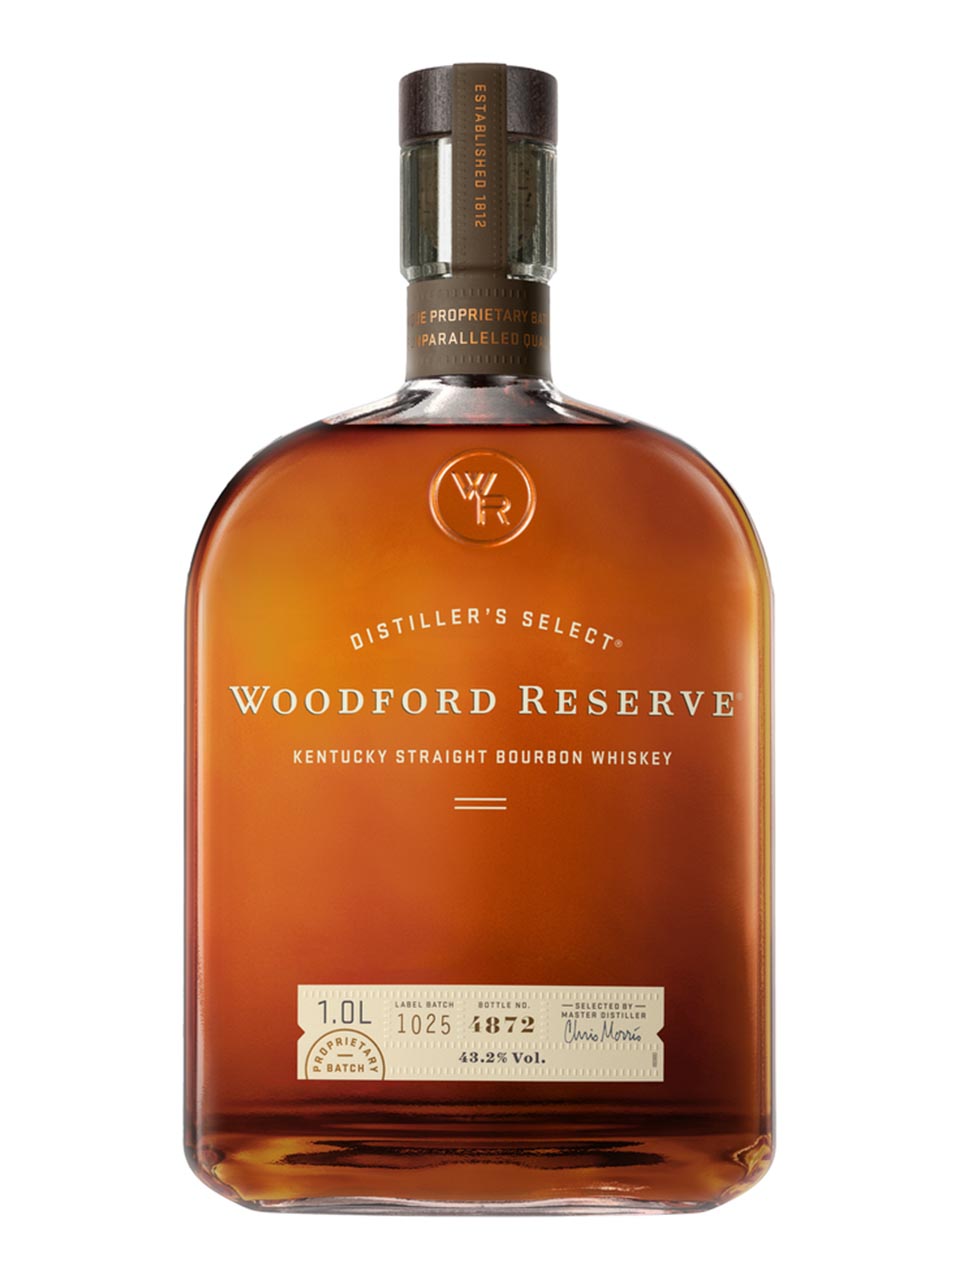 Woodford Reserve Disitllers Selection Kentucky Straight Bourbon Whiskey 43.2% 1L null - onesize - 1